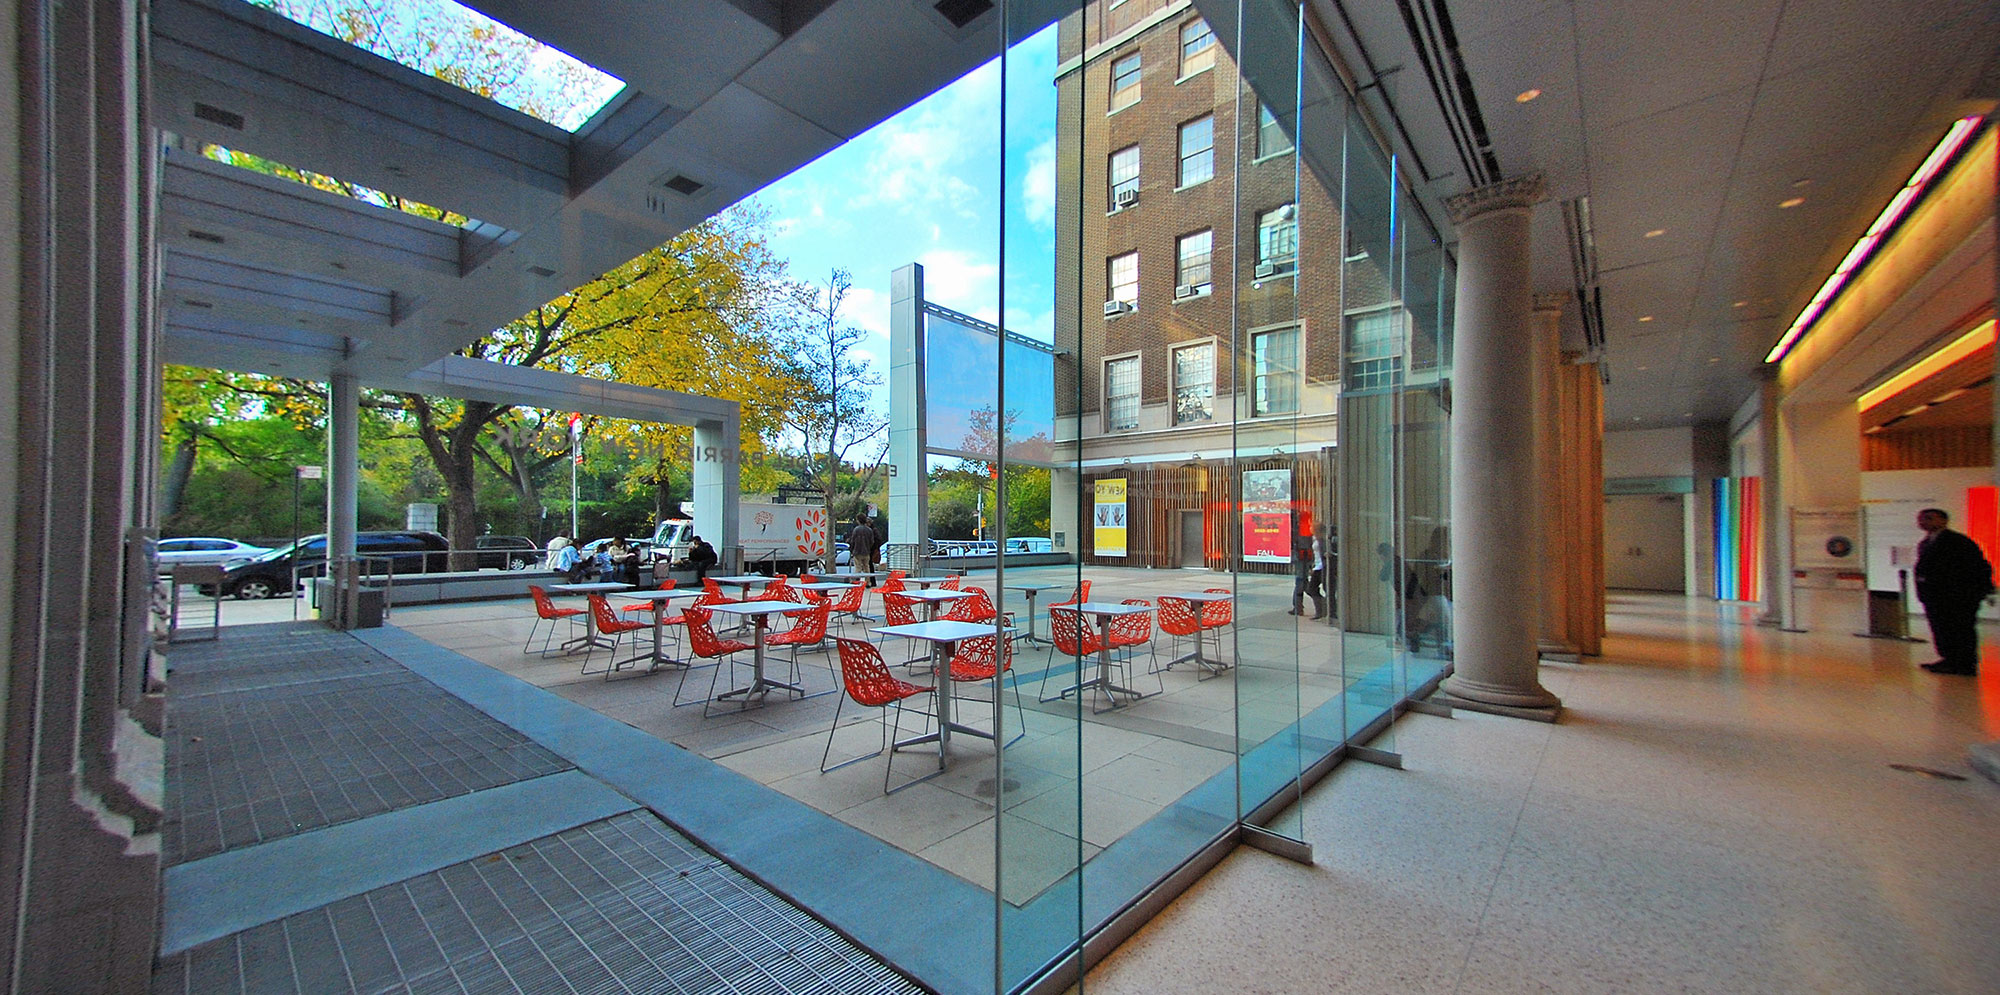 View of outdoor seating area at El Museo del Barrio from the inside